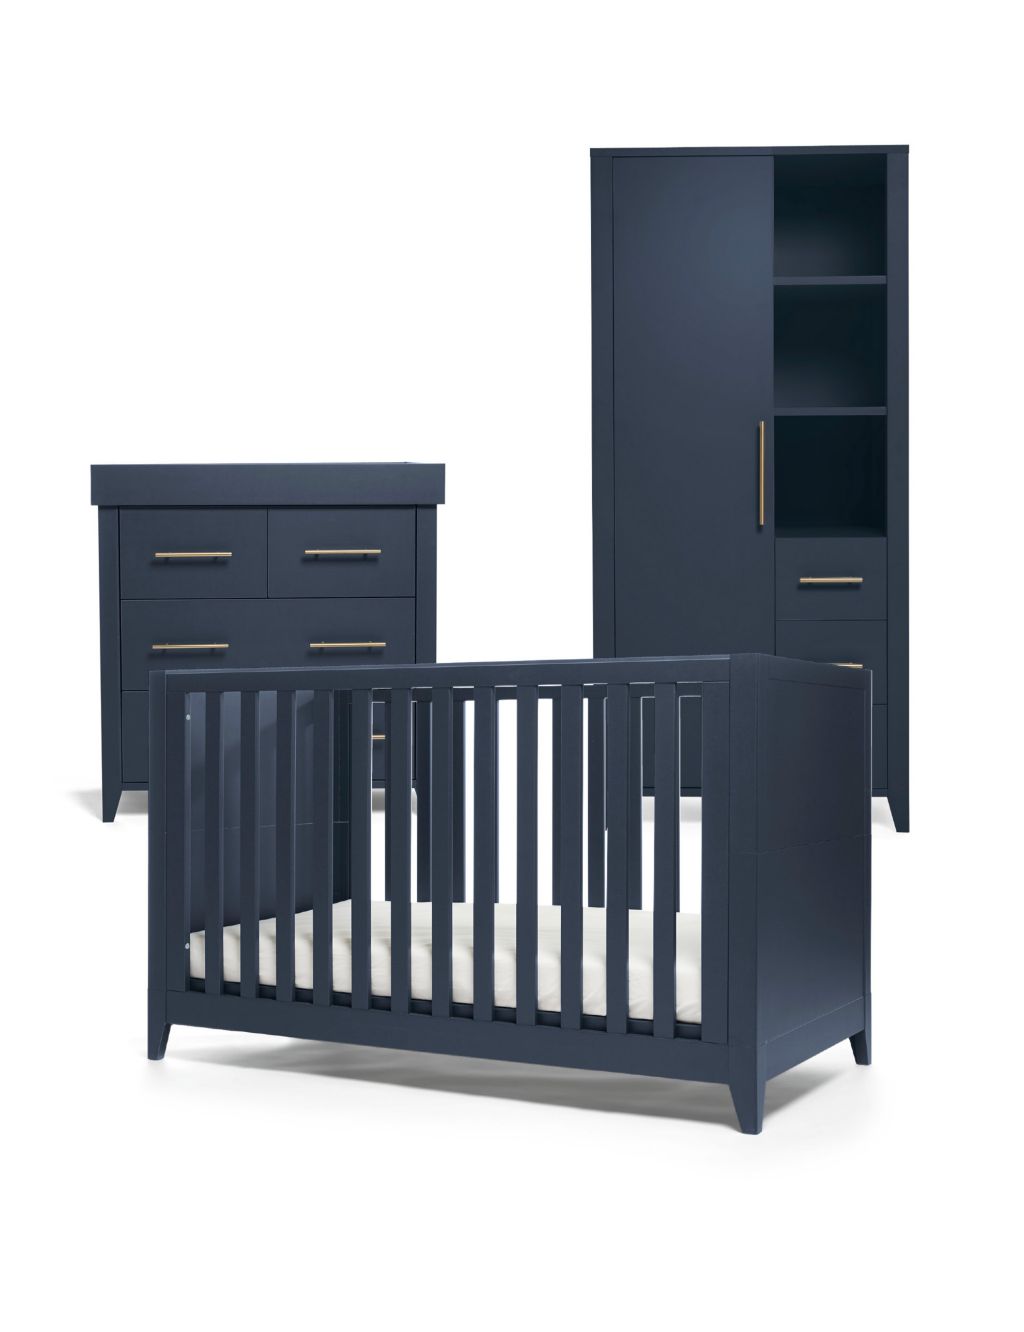 Melfi 3 Piece Cotbed Range with Dresser and Wardrobe image 1